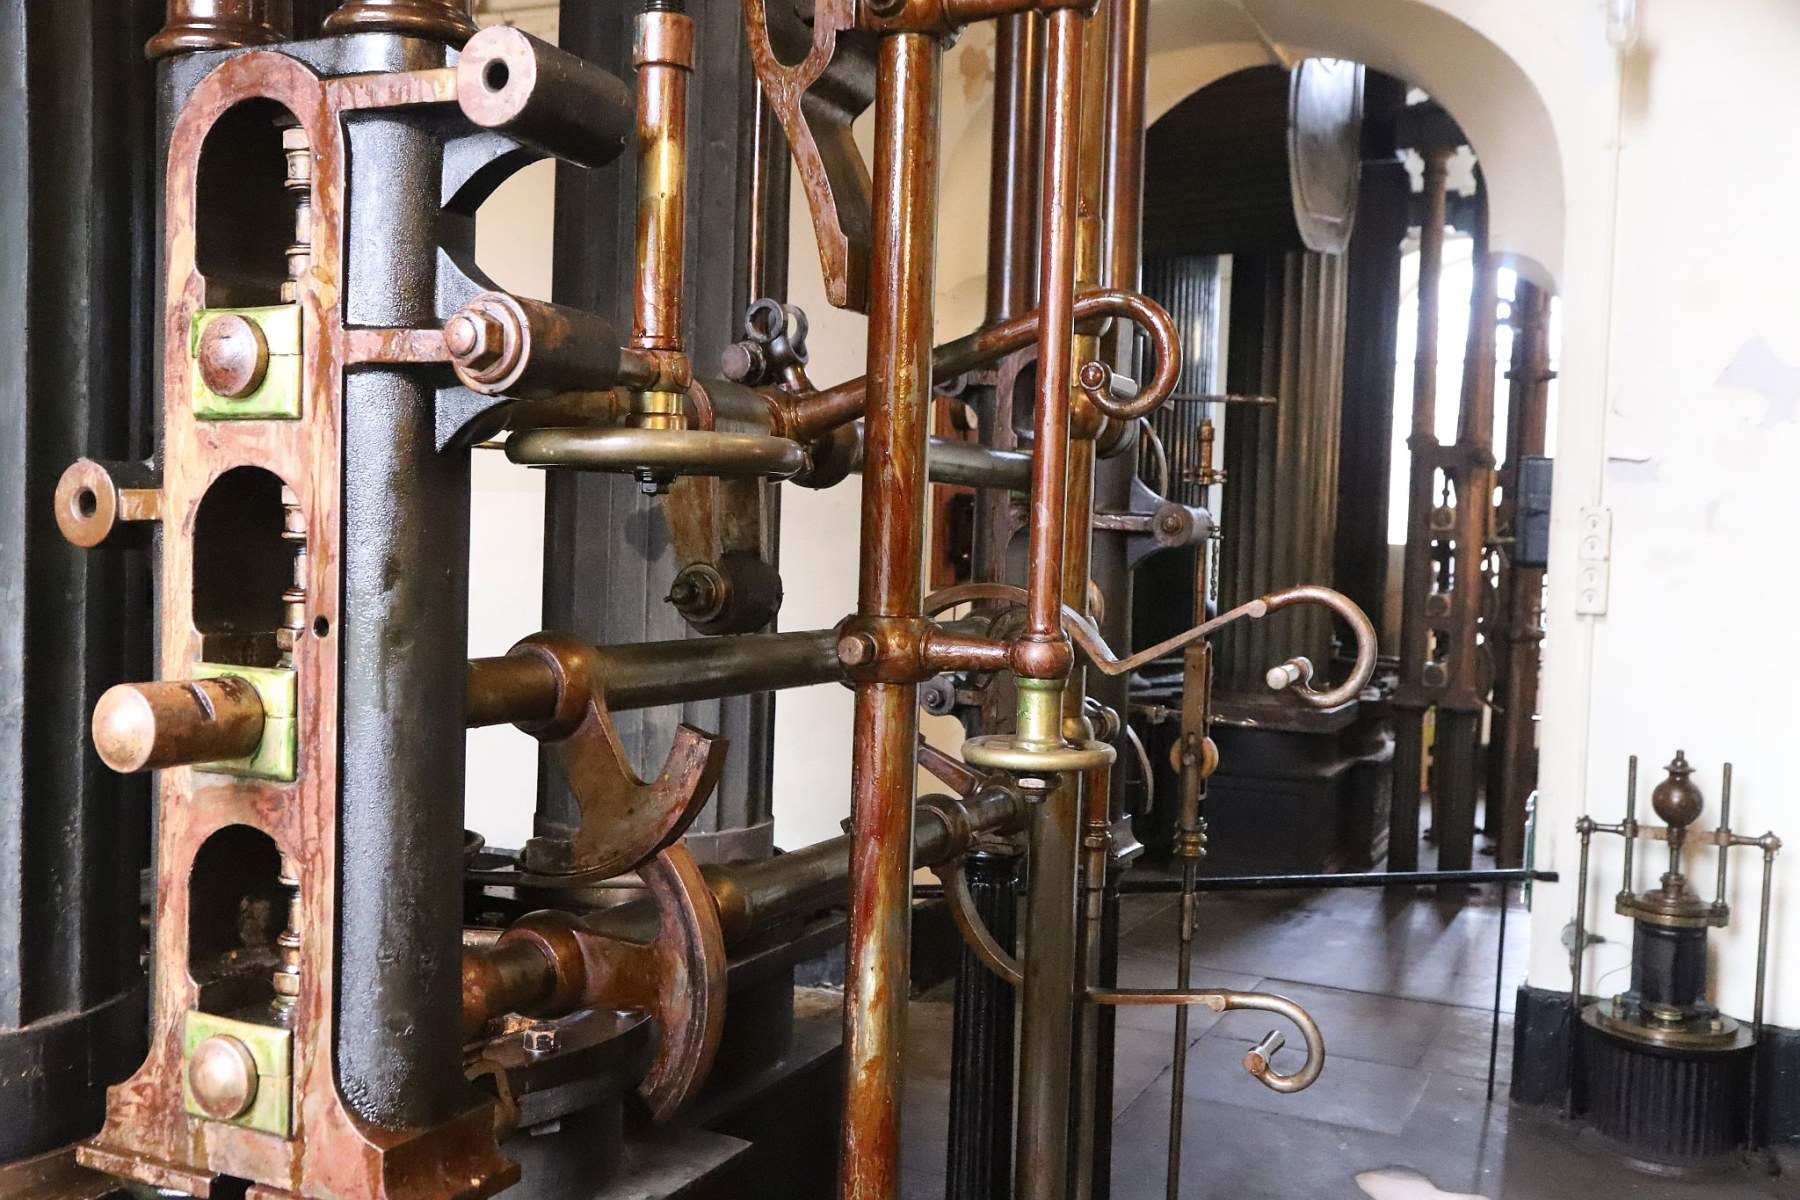 Pipework of the 90 inch Grand Junction Cornish steam beam engine at the London Museum of Water and Steam